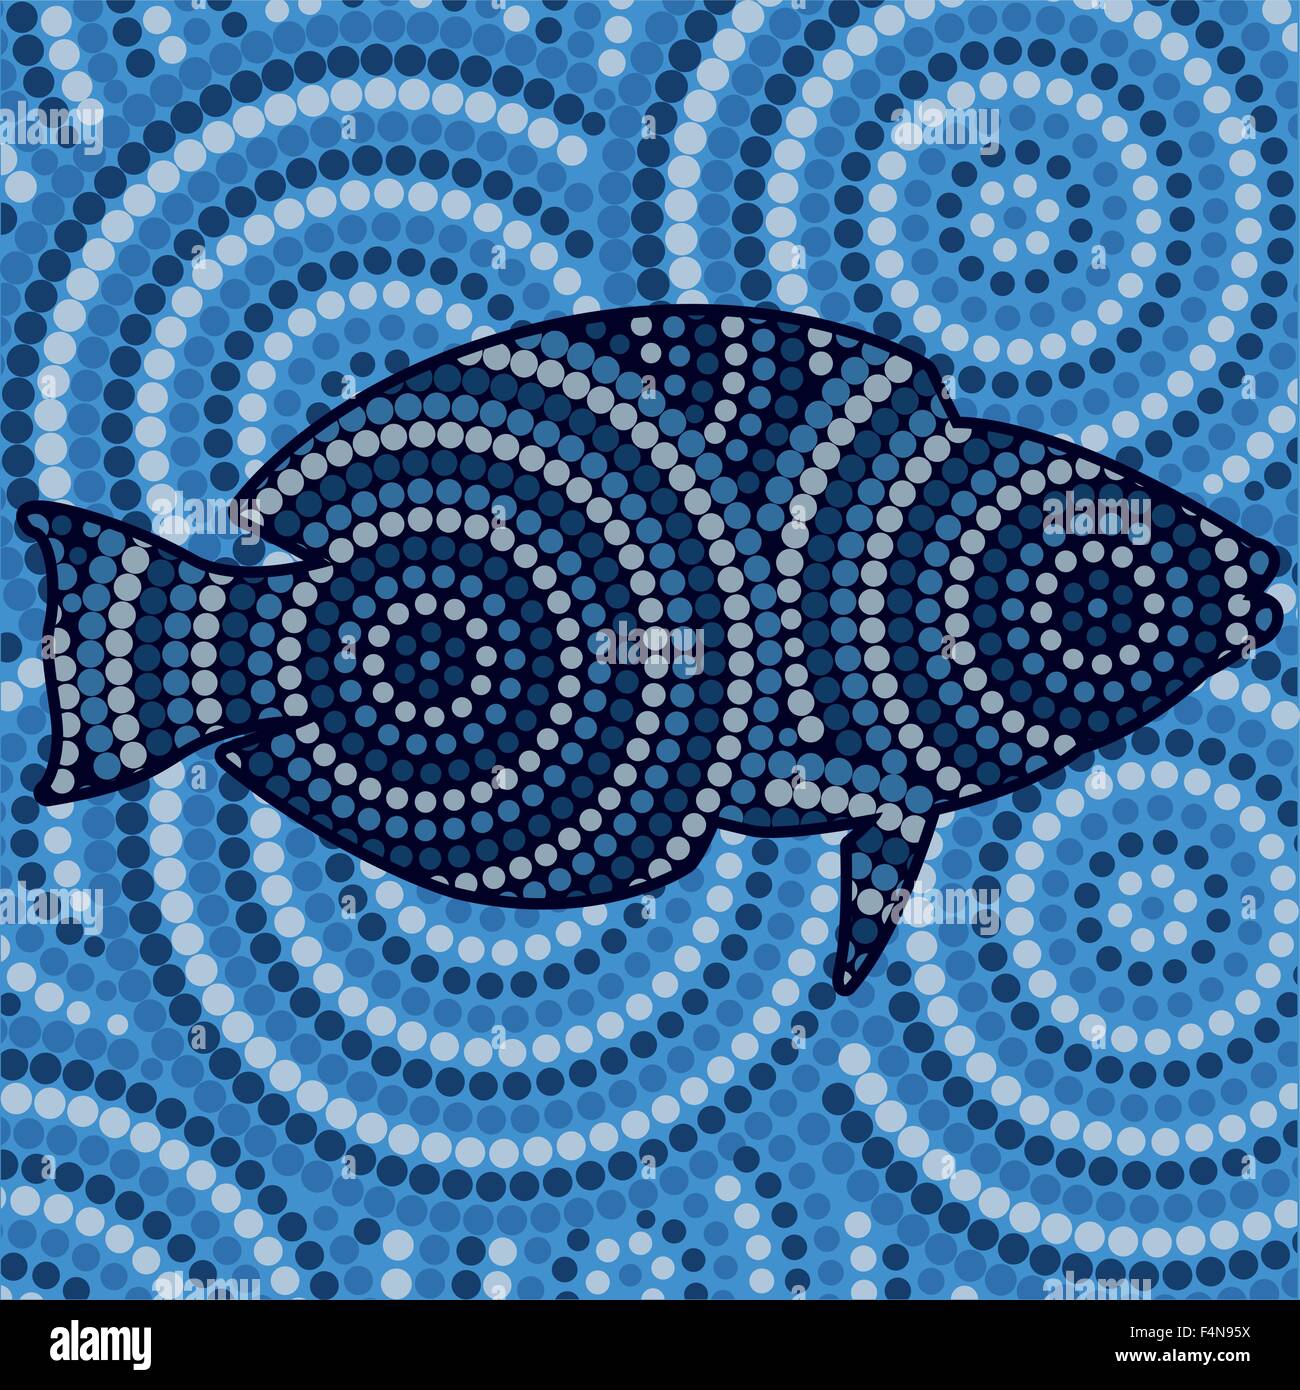 Abstract Aboriginal Fish Dot Painting In Vector Format Stock Vector Image Art Alamy